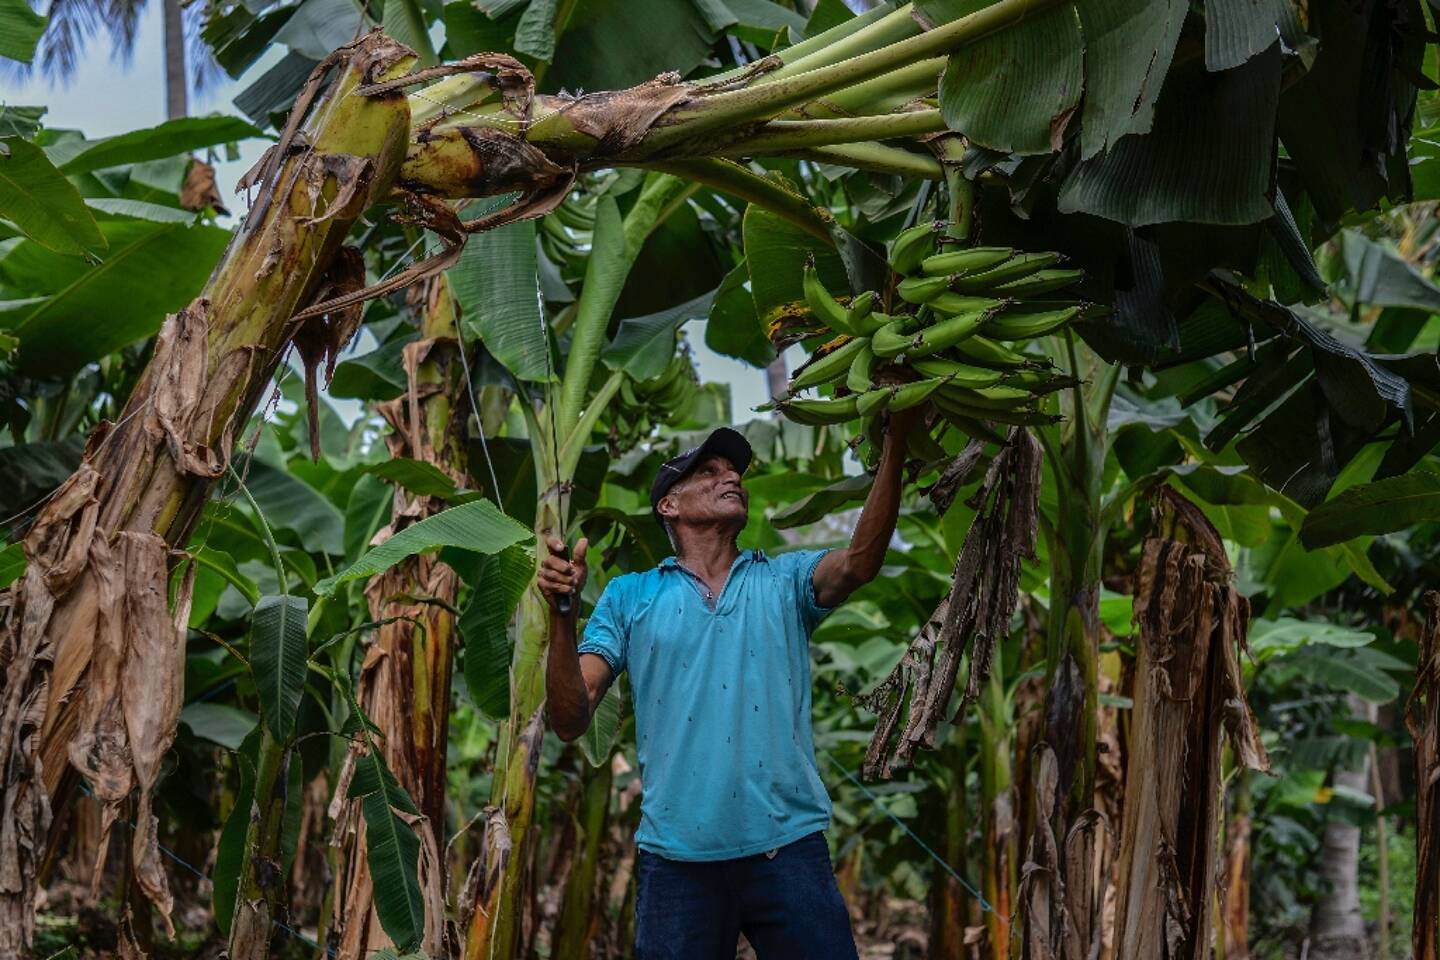 Pedro Fleets, a farm worker, in an orchard in Chindenga, Nicaragua on May 11, 2022.